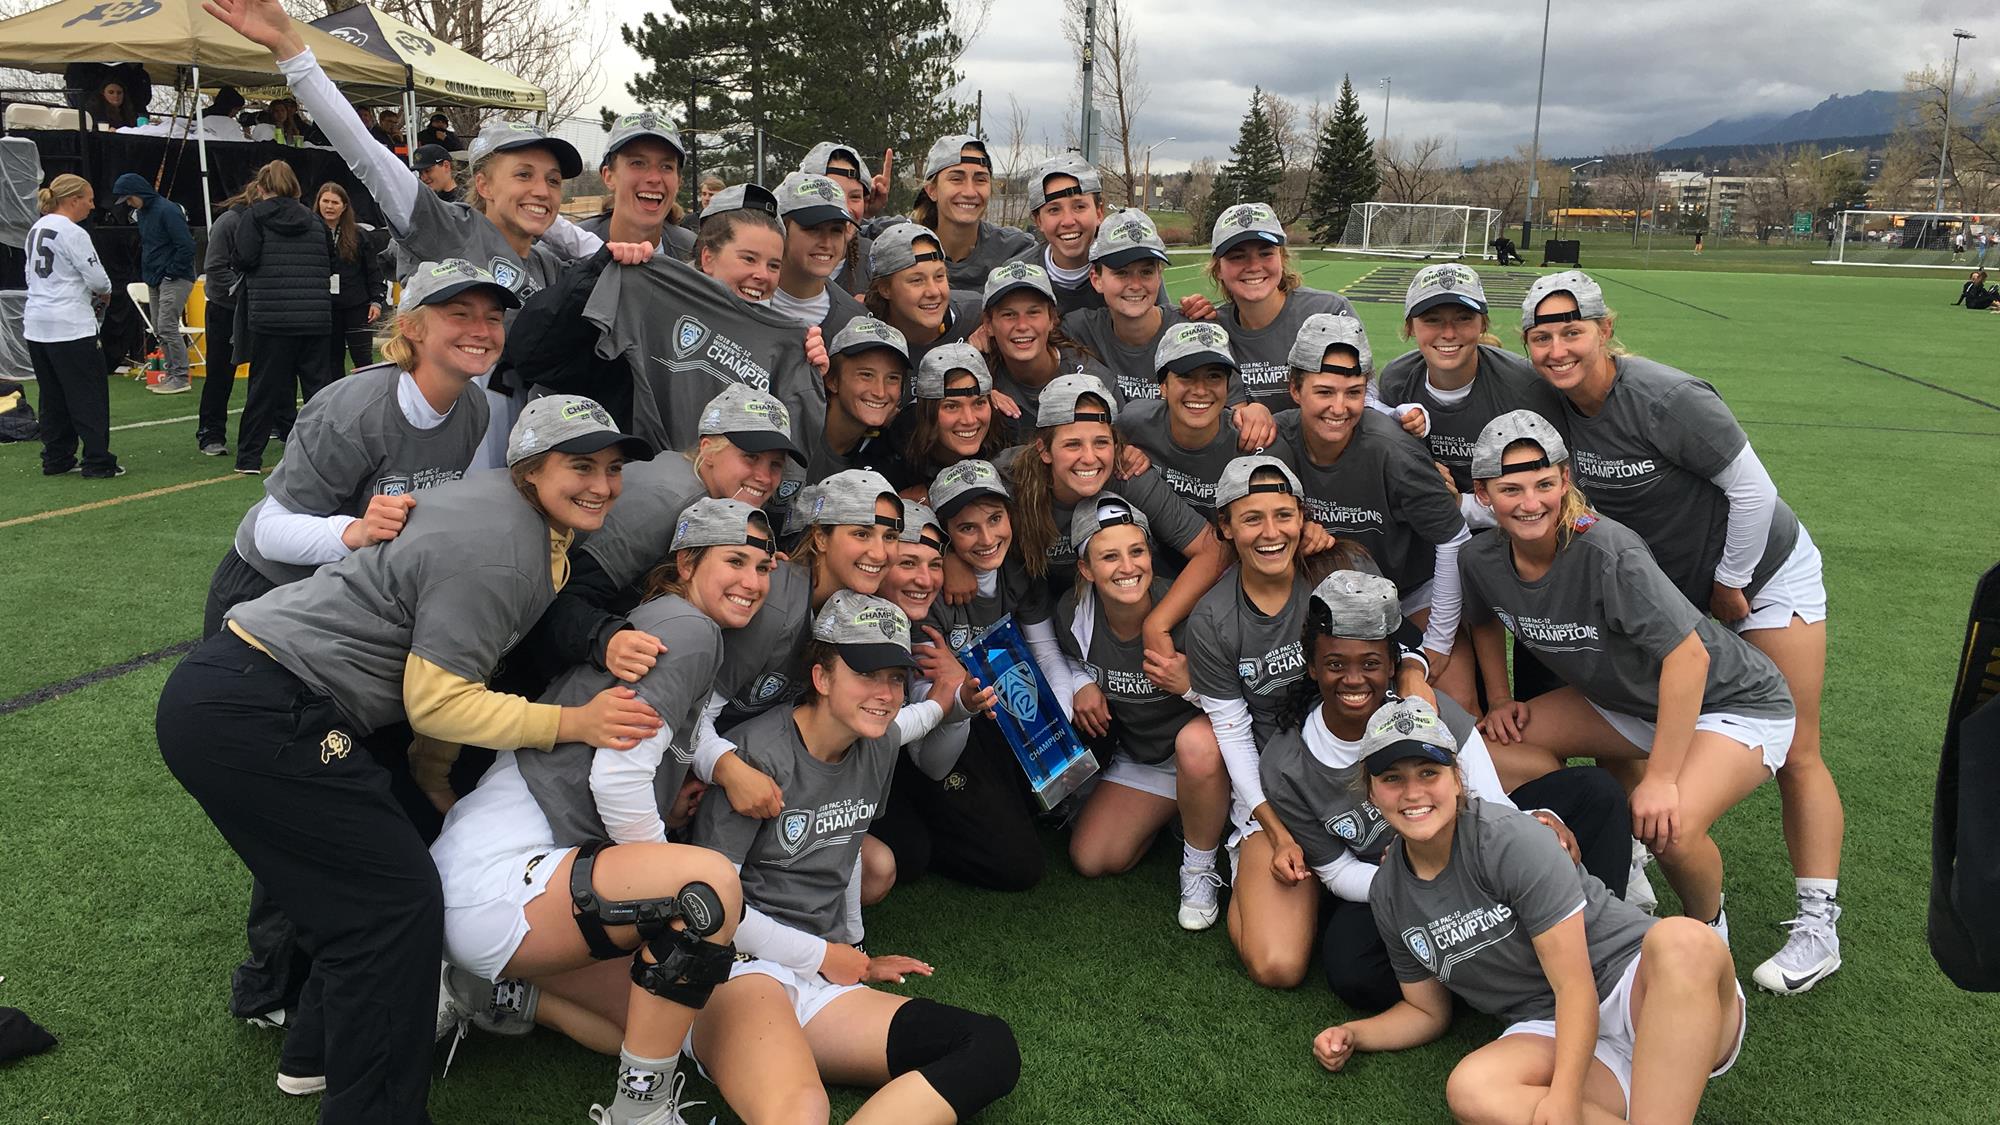 Pac12 Lacrosse champions CU At the Game